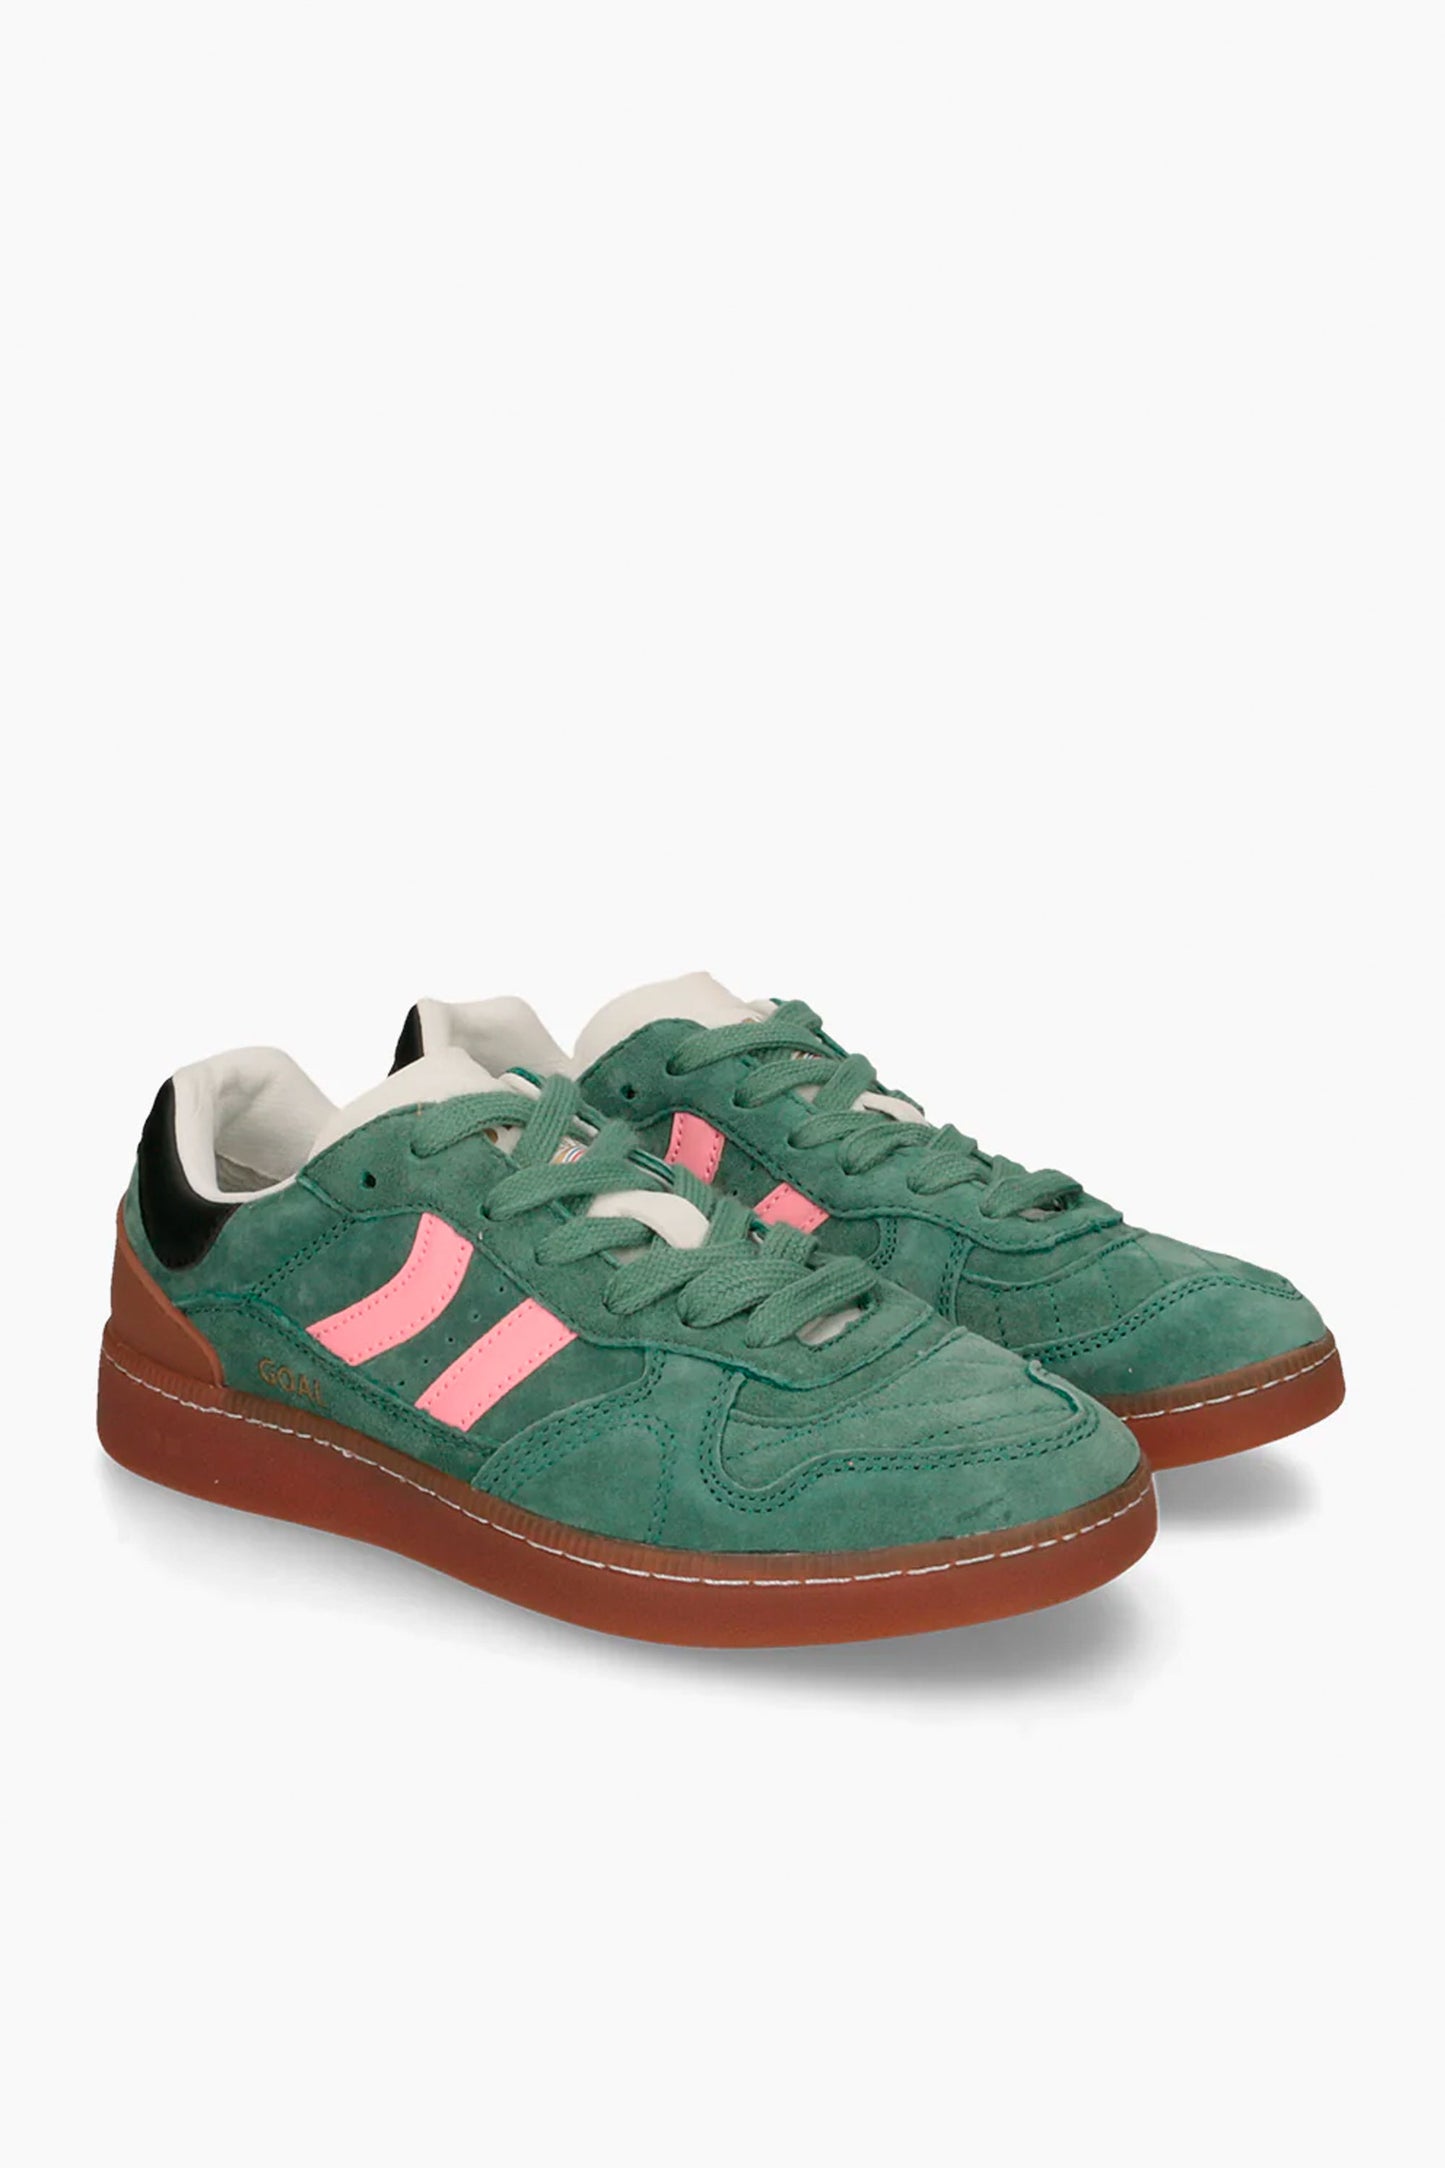 Pukas-Surf-Shop-Coolway-Footwear-Goal-Green-Forest